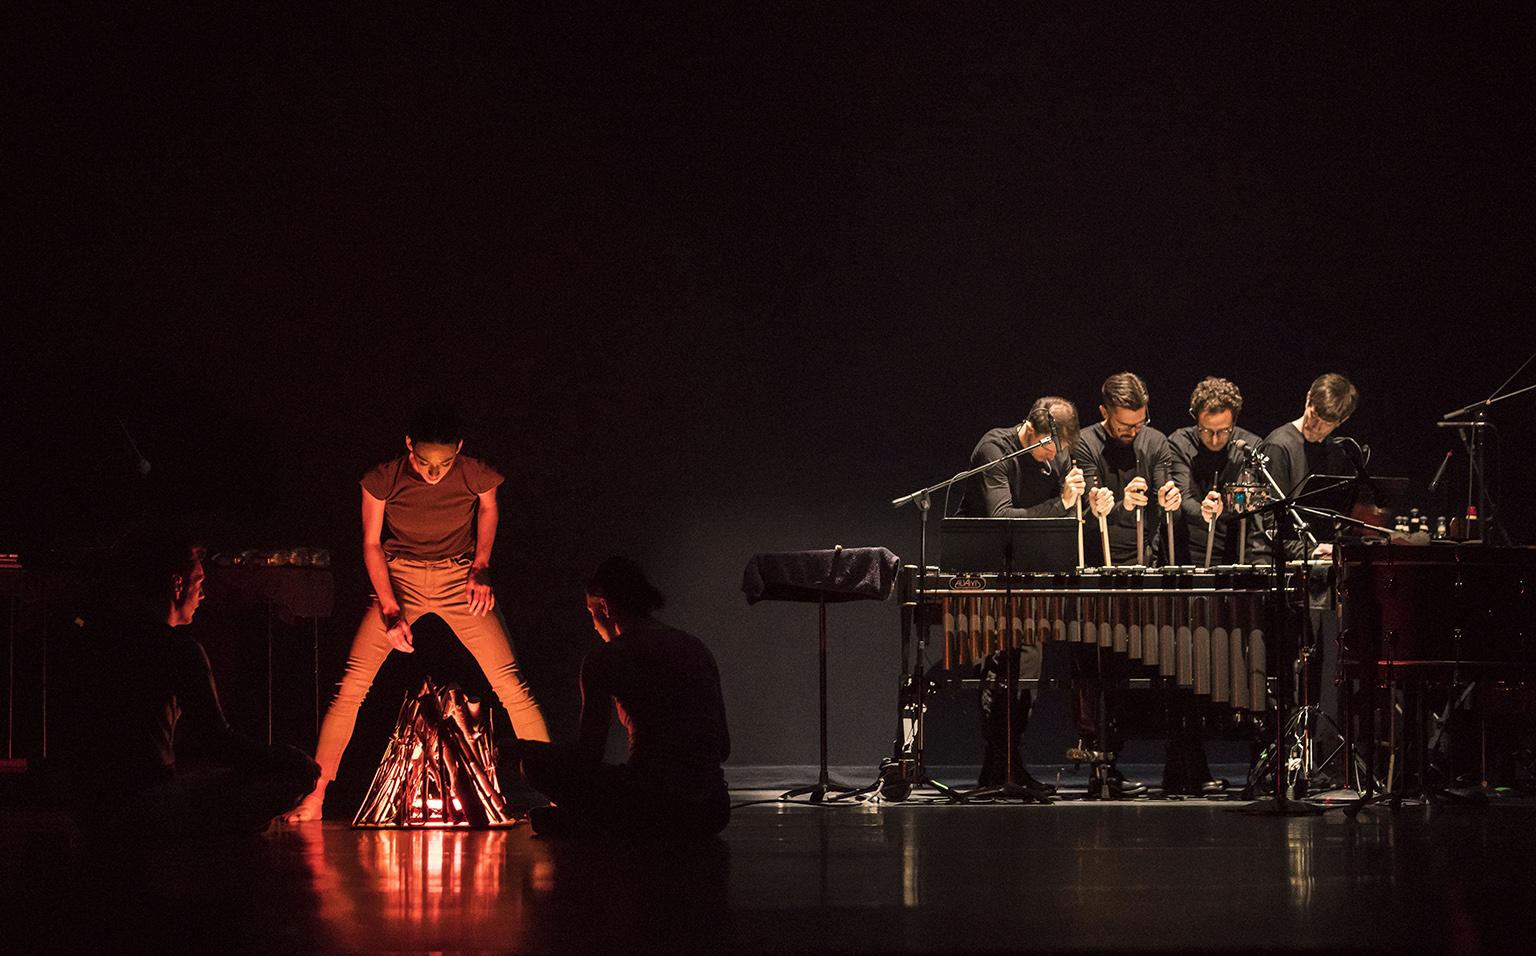 Hubbard Street Dance Chicago in “There Was Nothing” by Movement Art Is (Jon Boogz and Lil Buck) accompanied by Third Coast Percussion. (Photo by Todd Rosenberg)